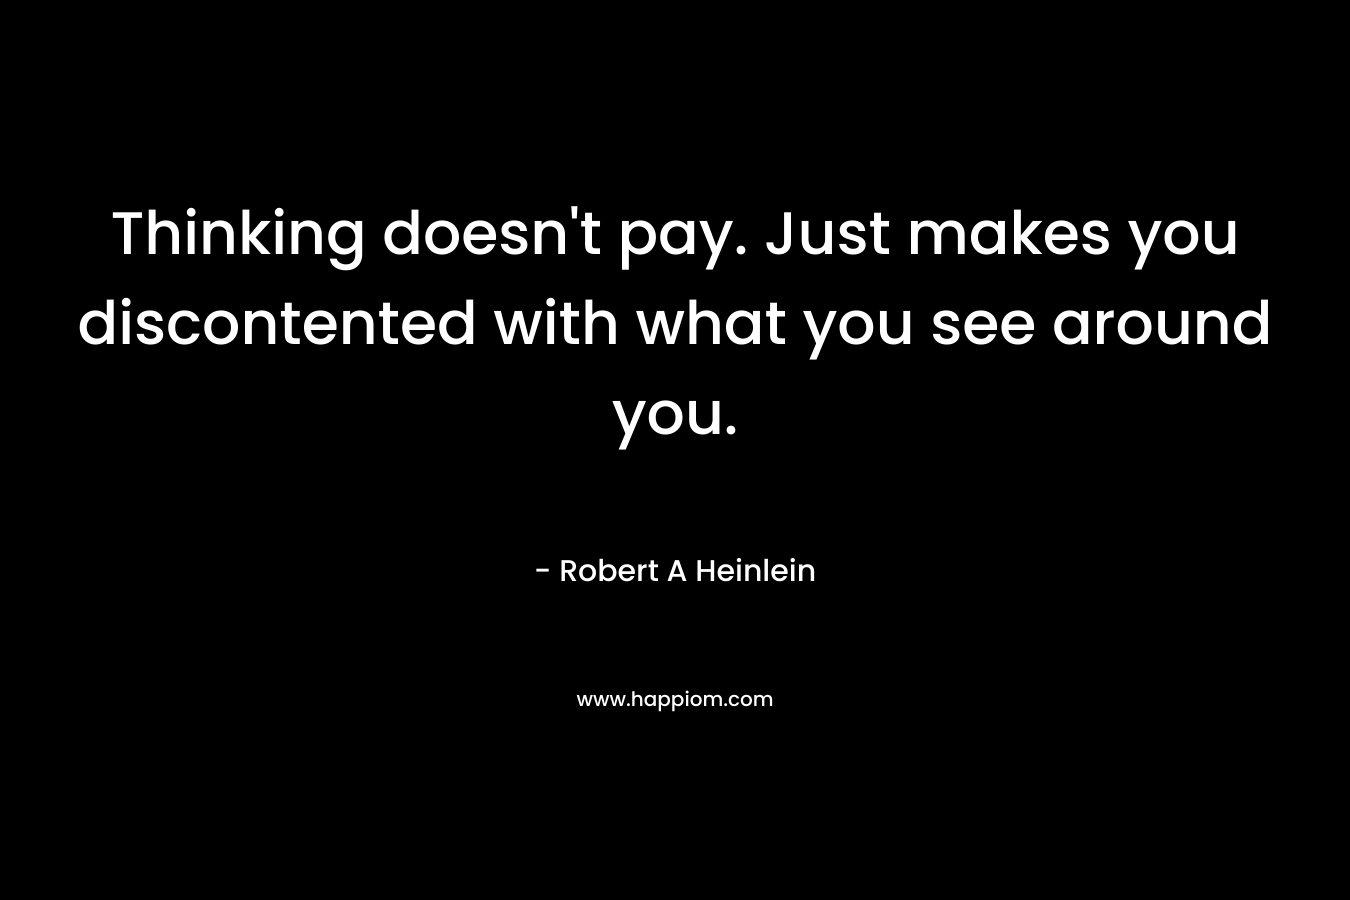 Thinking doesn't pay. Just makes you discontented with what you see around you.